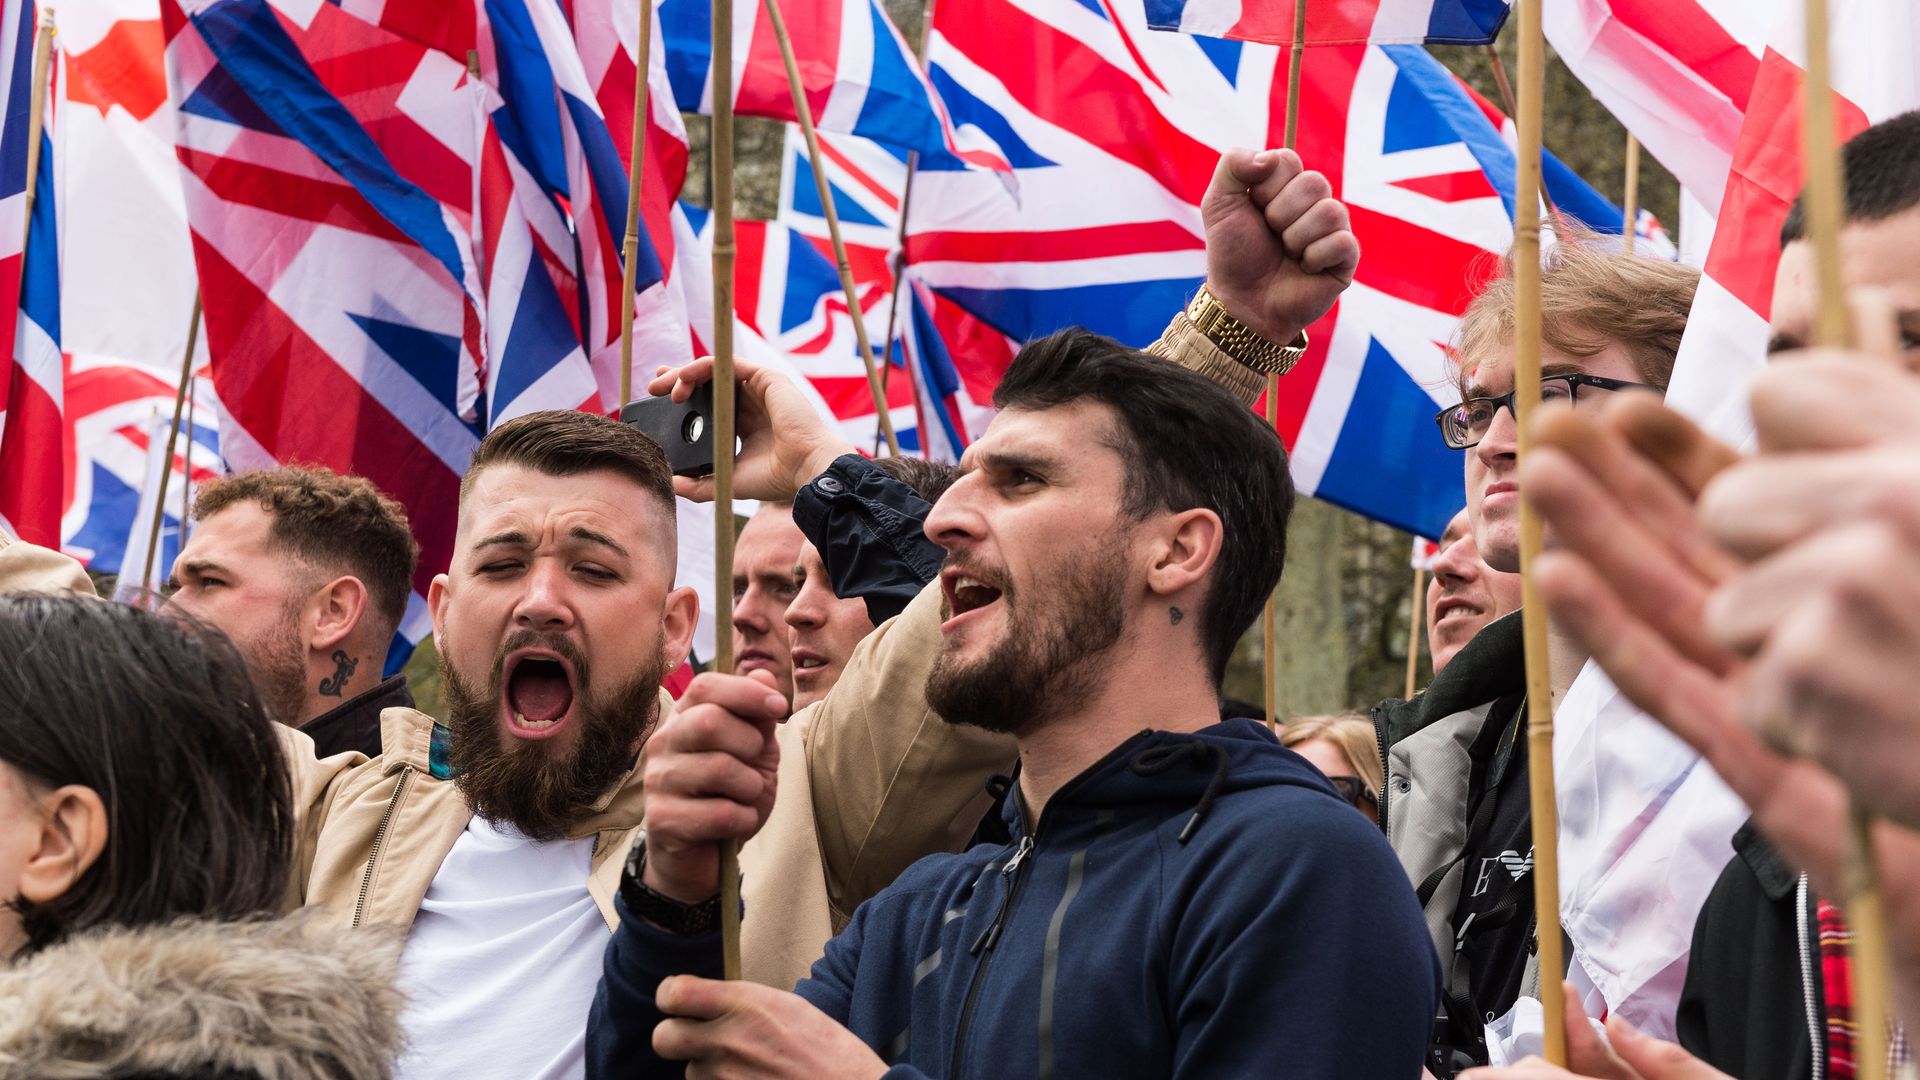 Members of Britain First extremist group